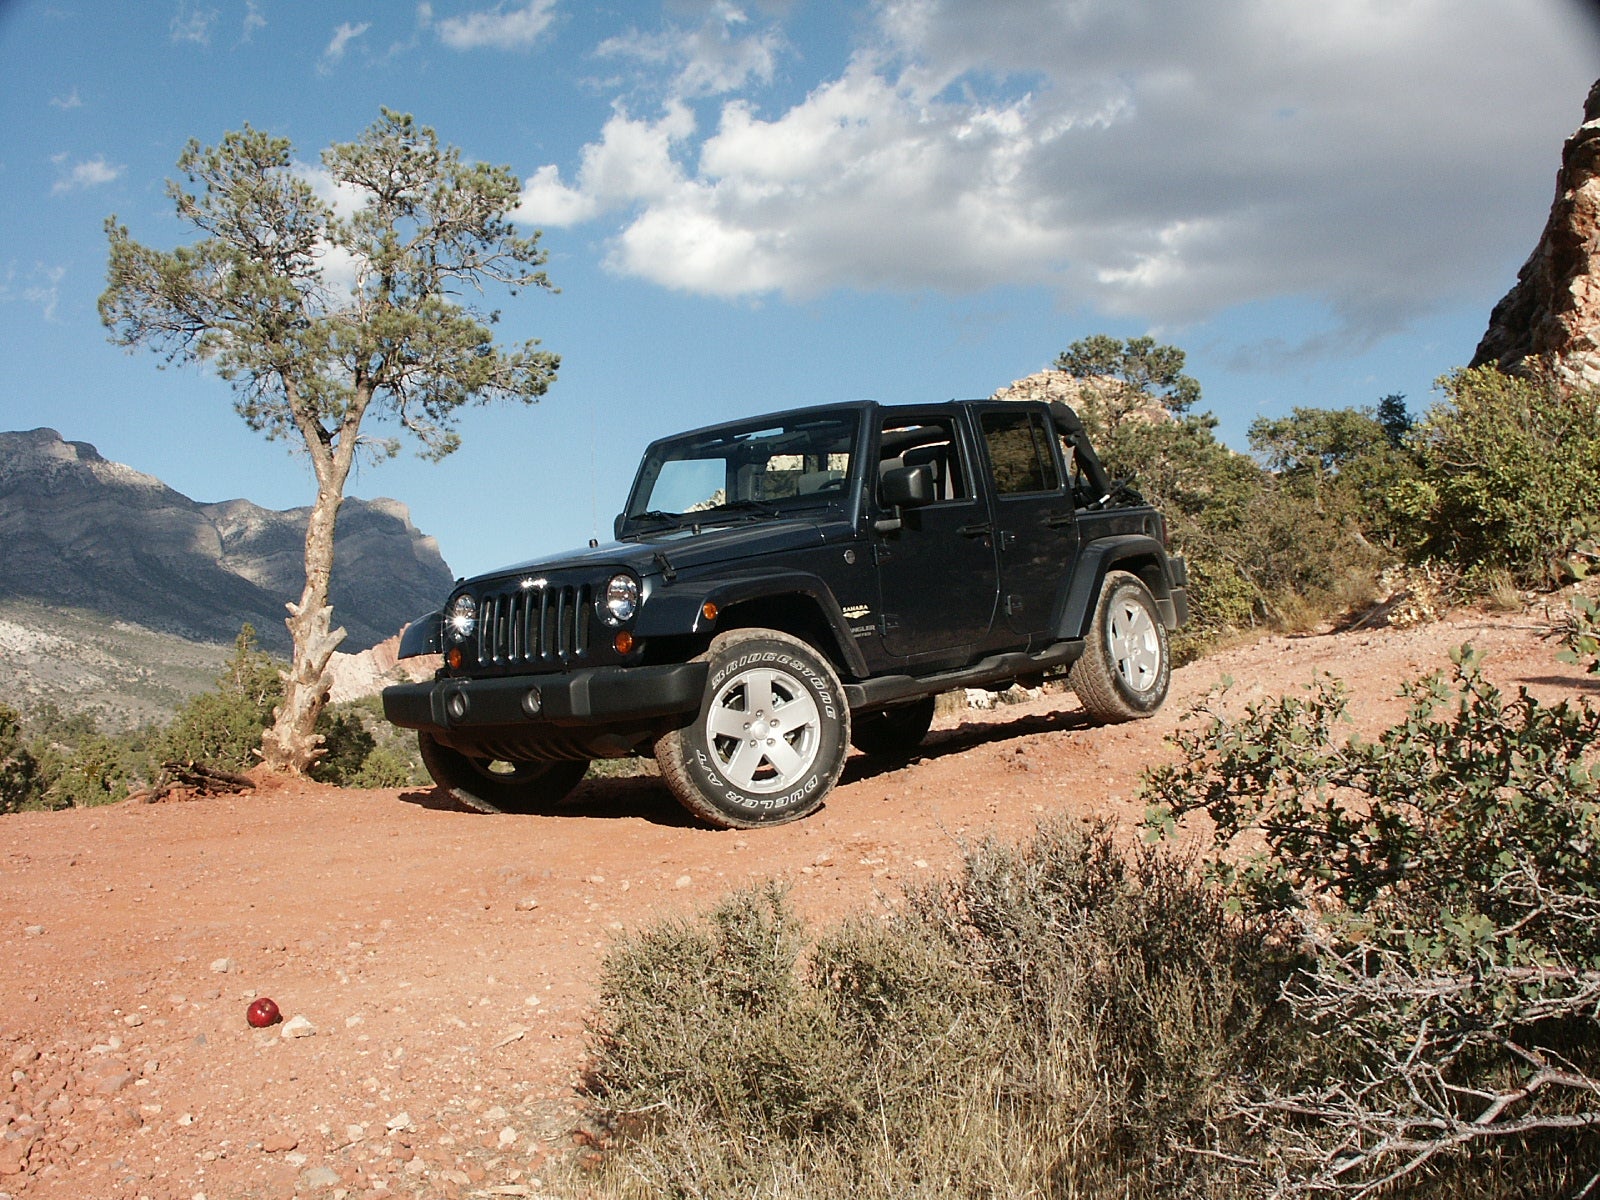 2008 Jeep wrangler unlimited sahara review #5